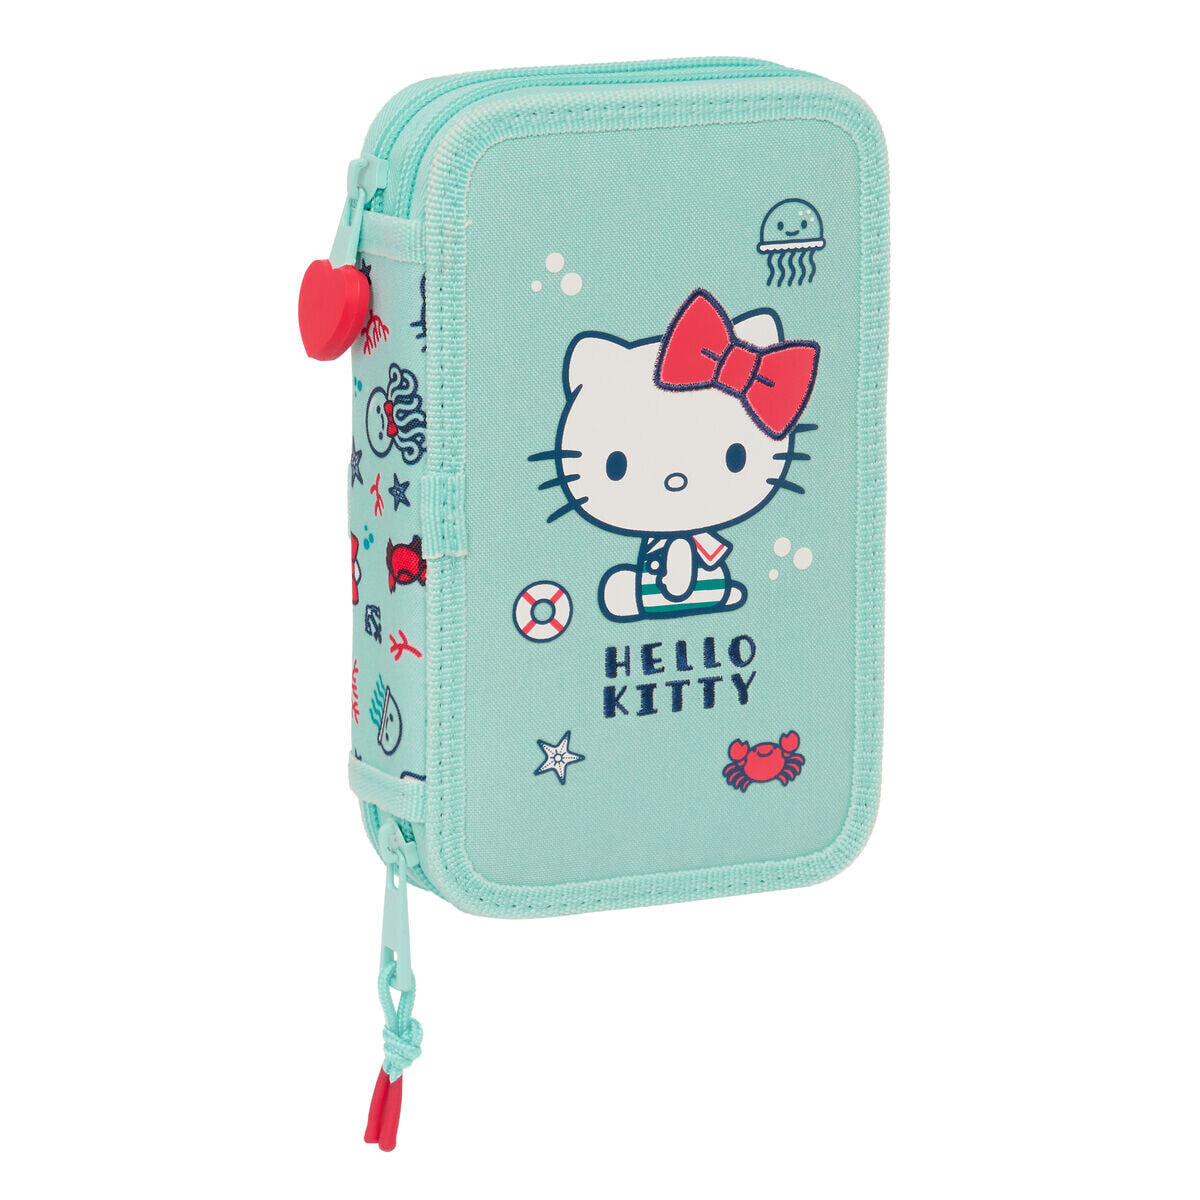 Double Pencil Case Hello Kitty Sea lovers Turquoise 12.5 x 19.5 x 4 cm (28 Pieces)